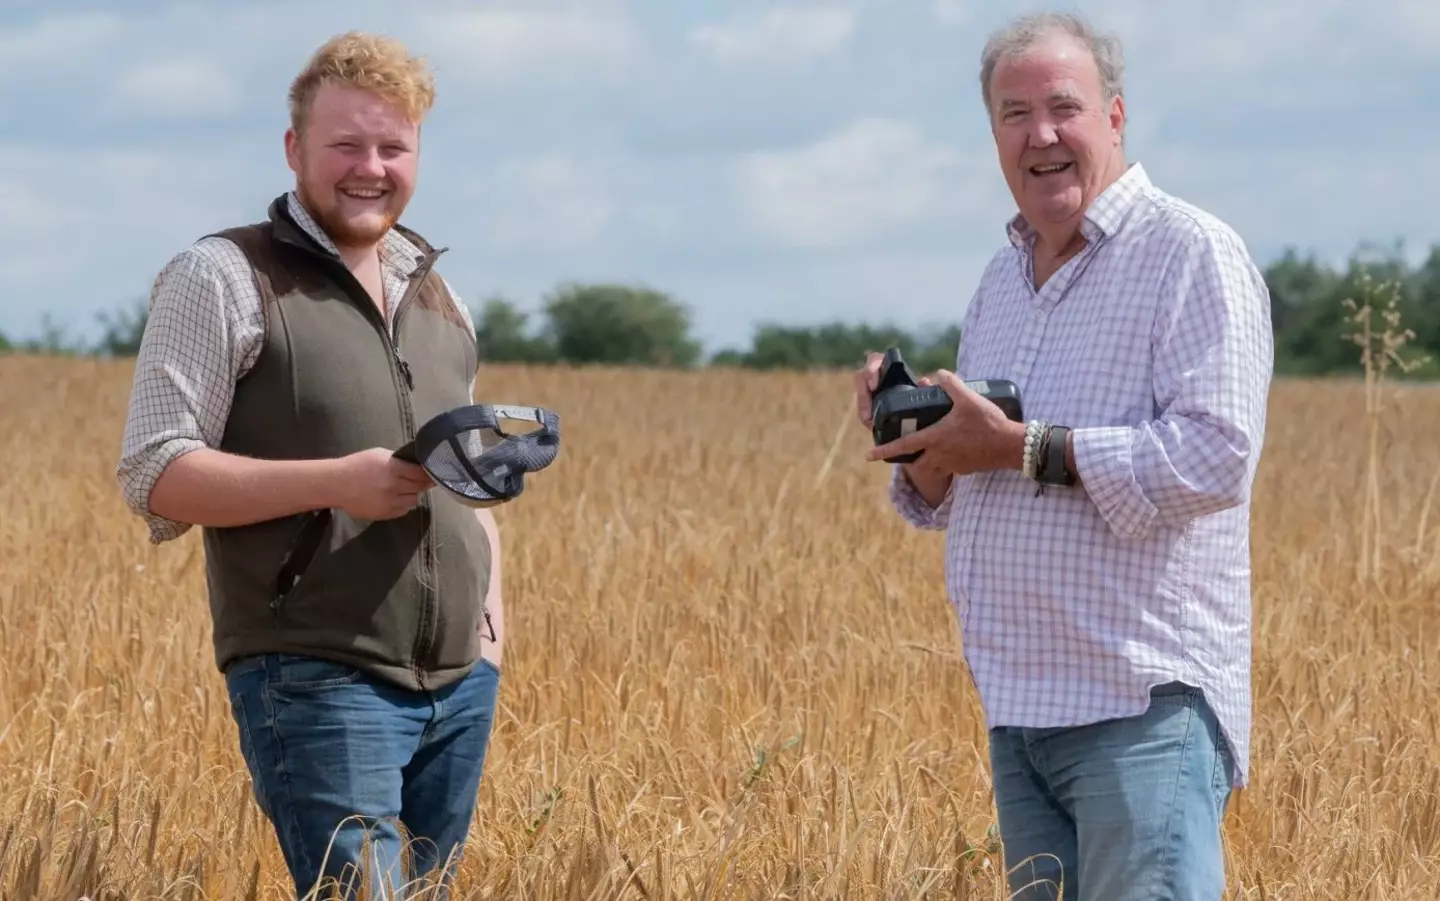 The former Top Gear host has shown fans how to 'defuse' the bottles.